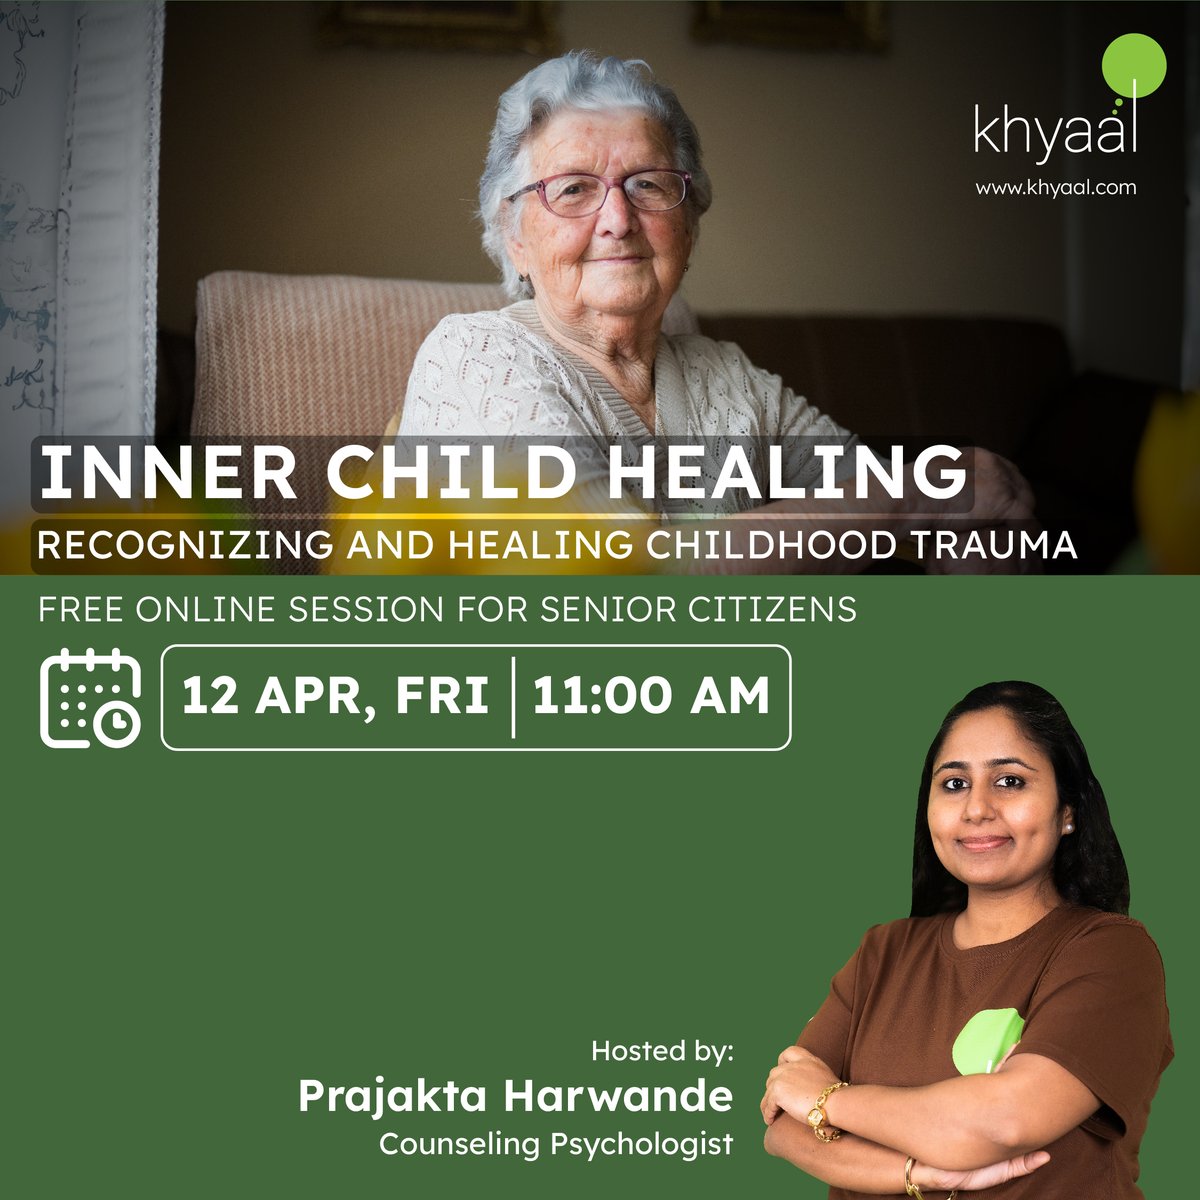 Learn effective ways to recognise and heal from childhood traumas. Attend this free online session if you're 55 years or older, or share it with your elderly loved one. #InnerChildHealing #SeniorCitizens
To attend our exclusive sessions:
📱 Download the app :…